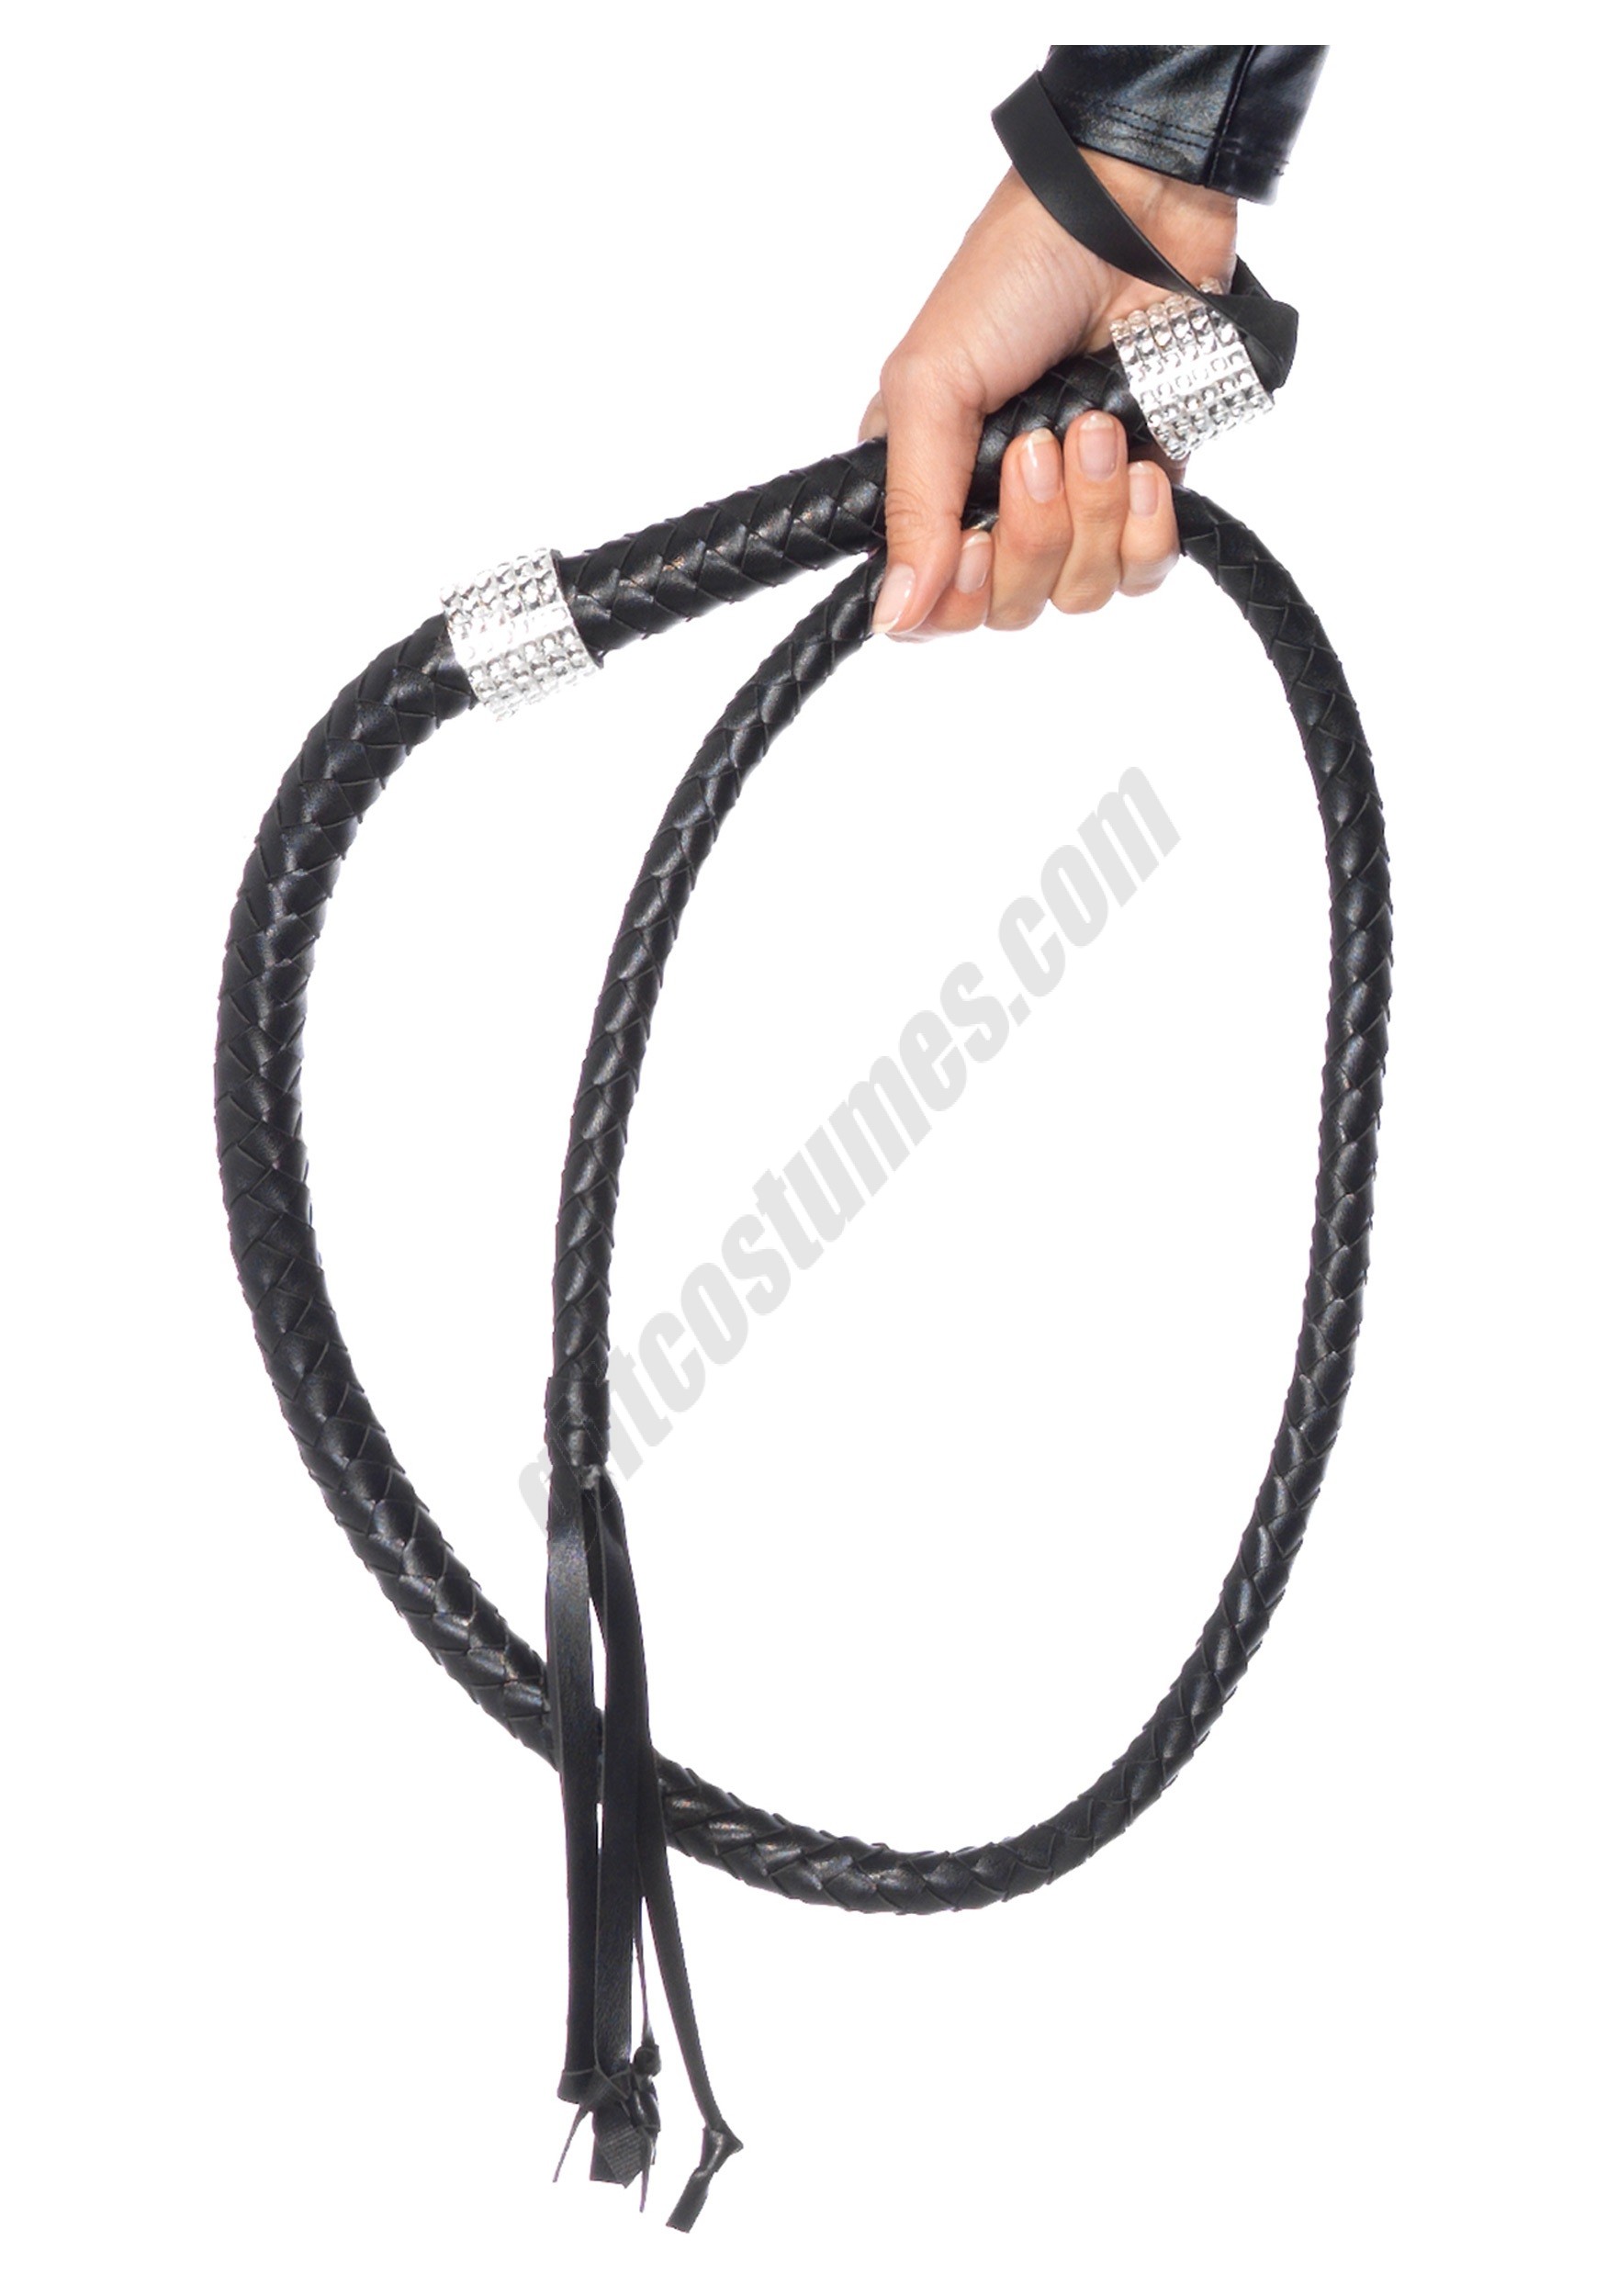 Faux Leather Whip Promotions - Faux Leather Whip Promotions